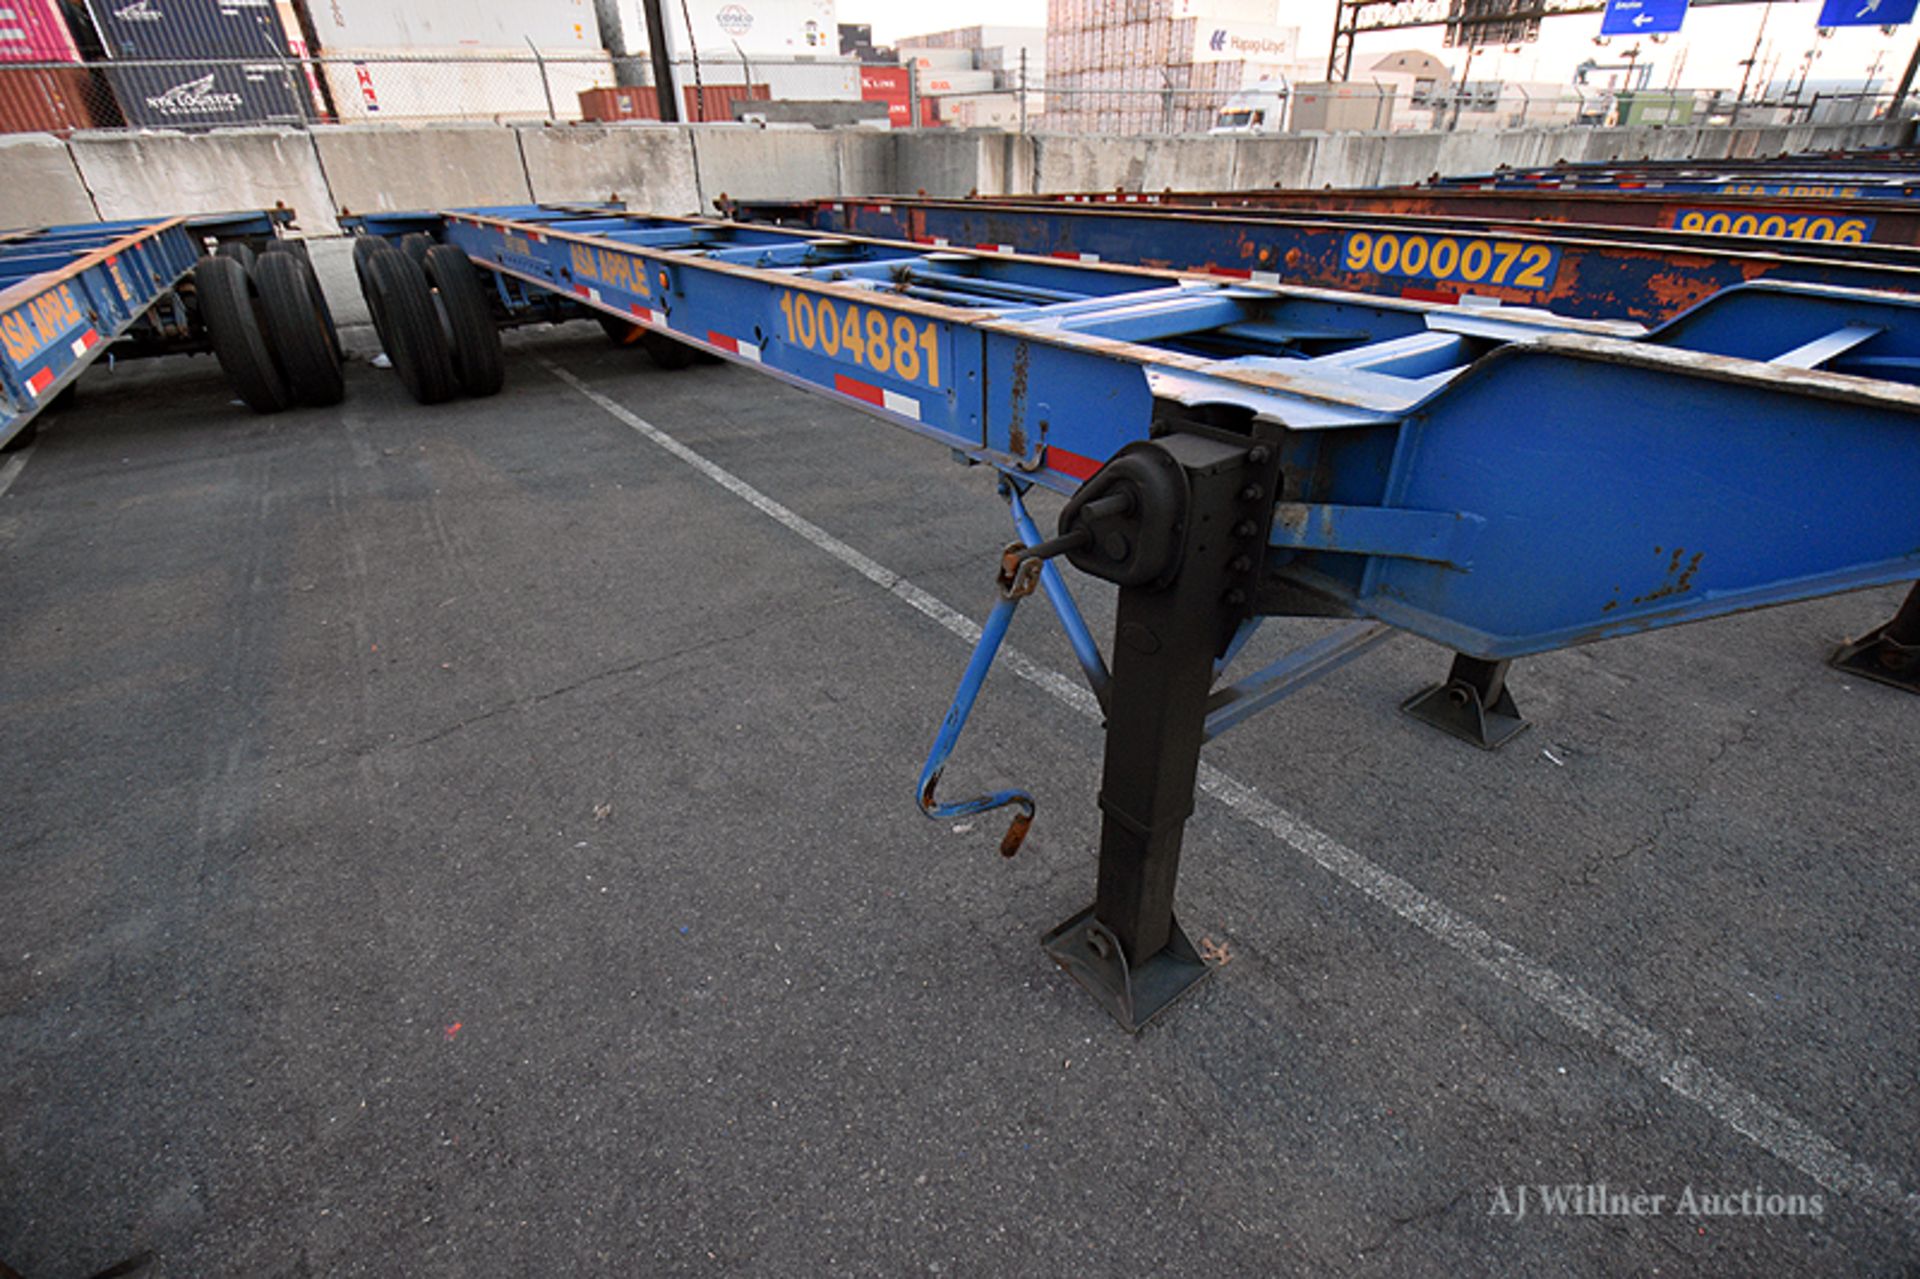 1995 Monon 40' to 48'-0 gooseneck slider container chassis VIN 1NNC04820SM246974 (Unit #1004881) - Image 2 of 5